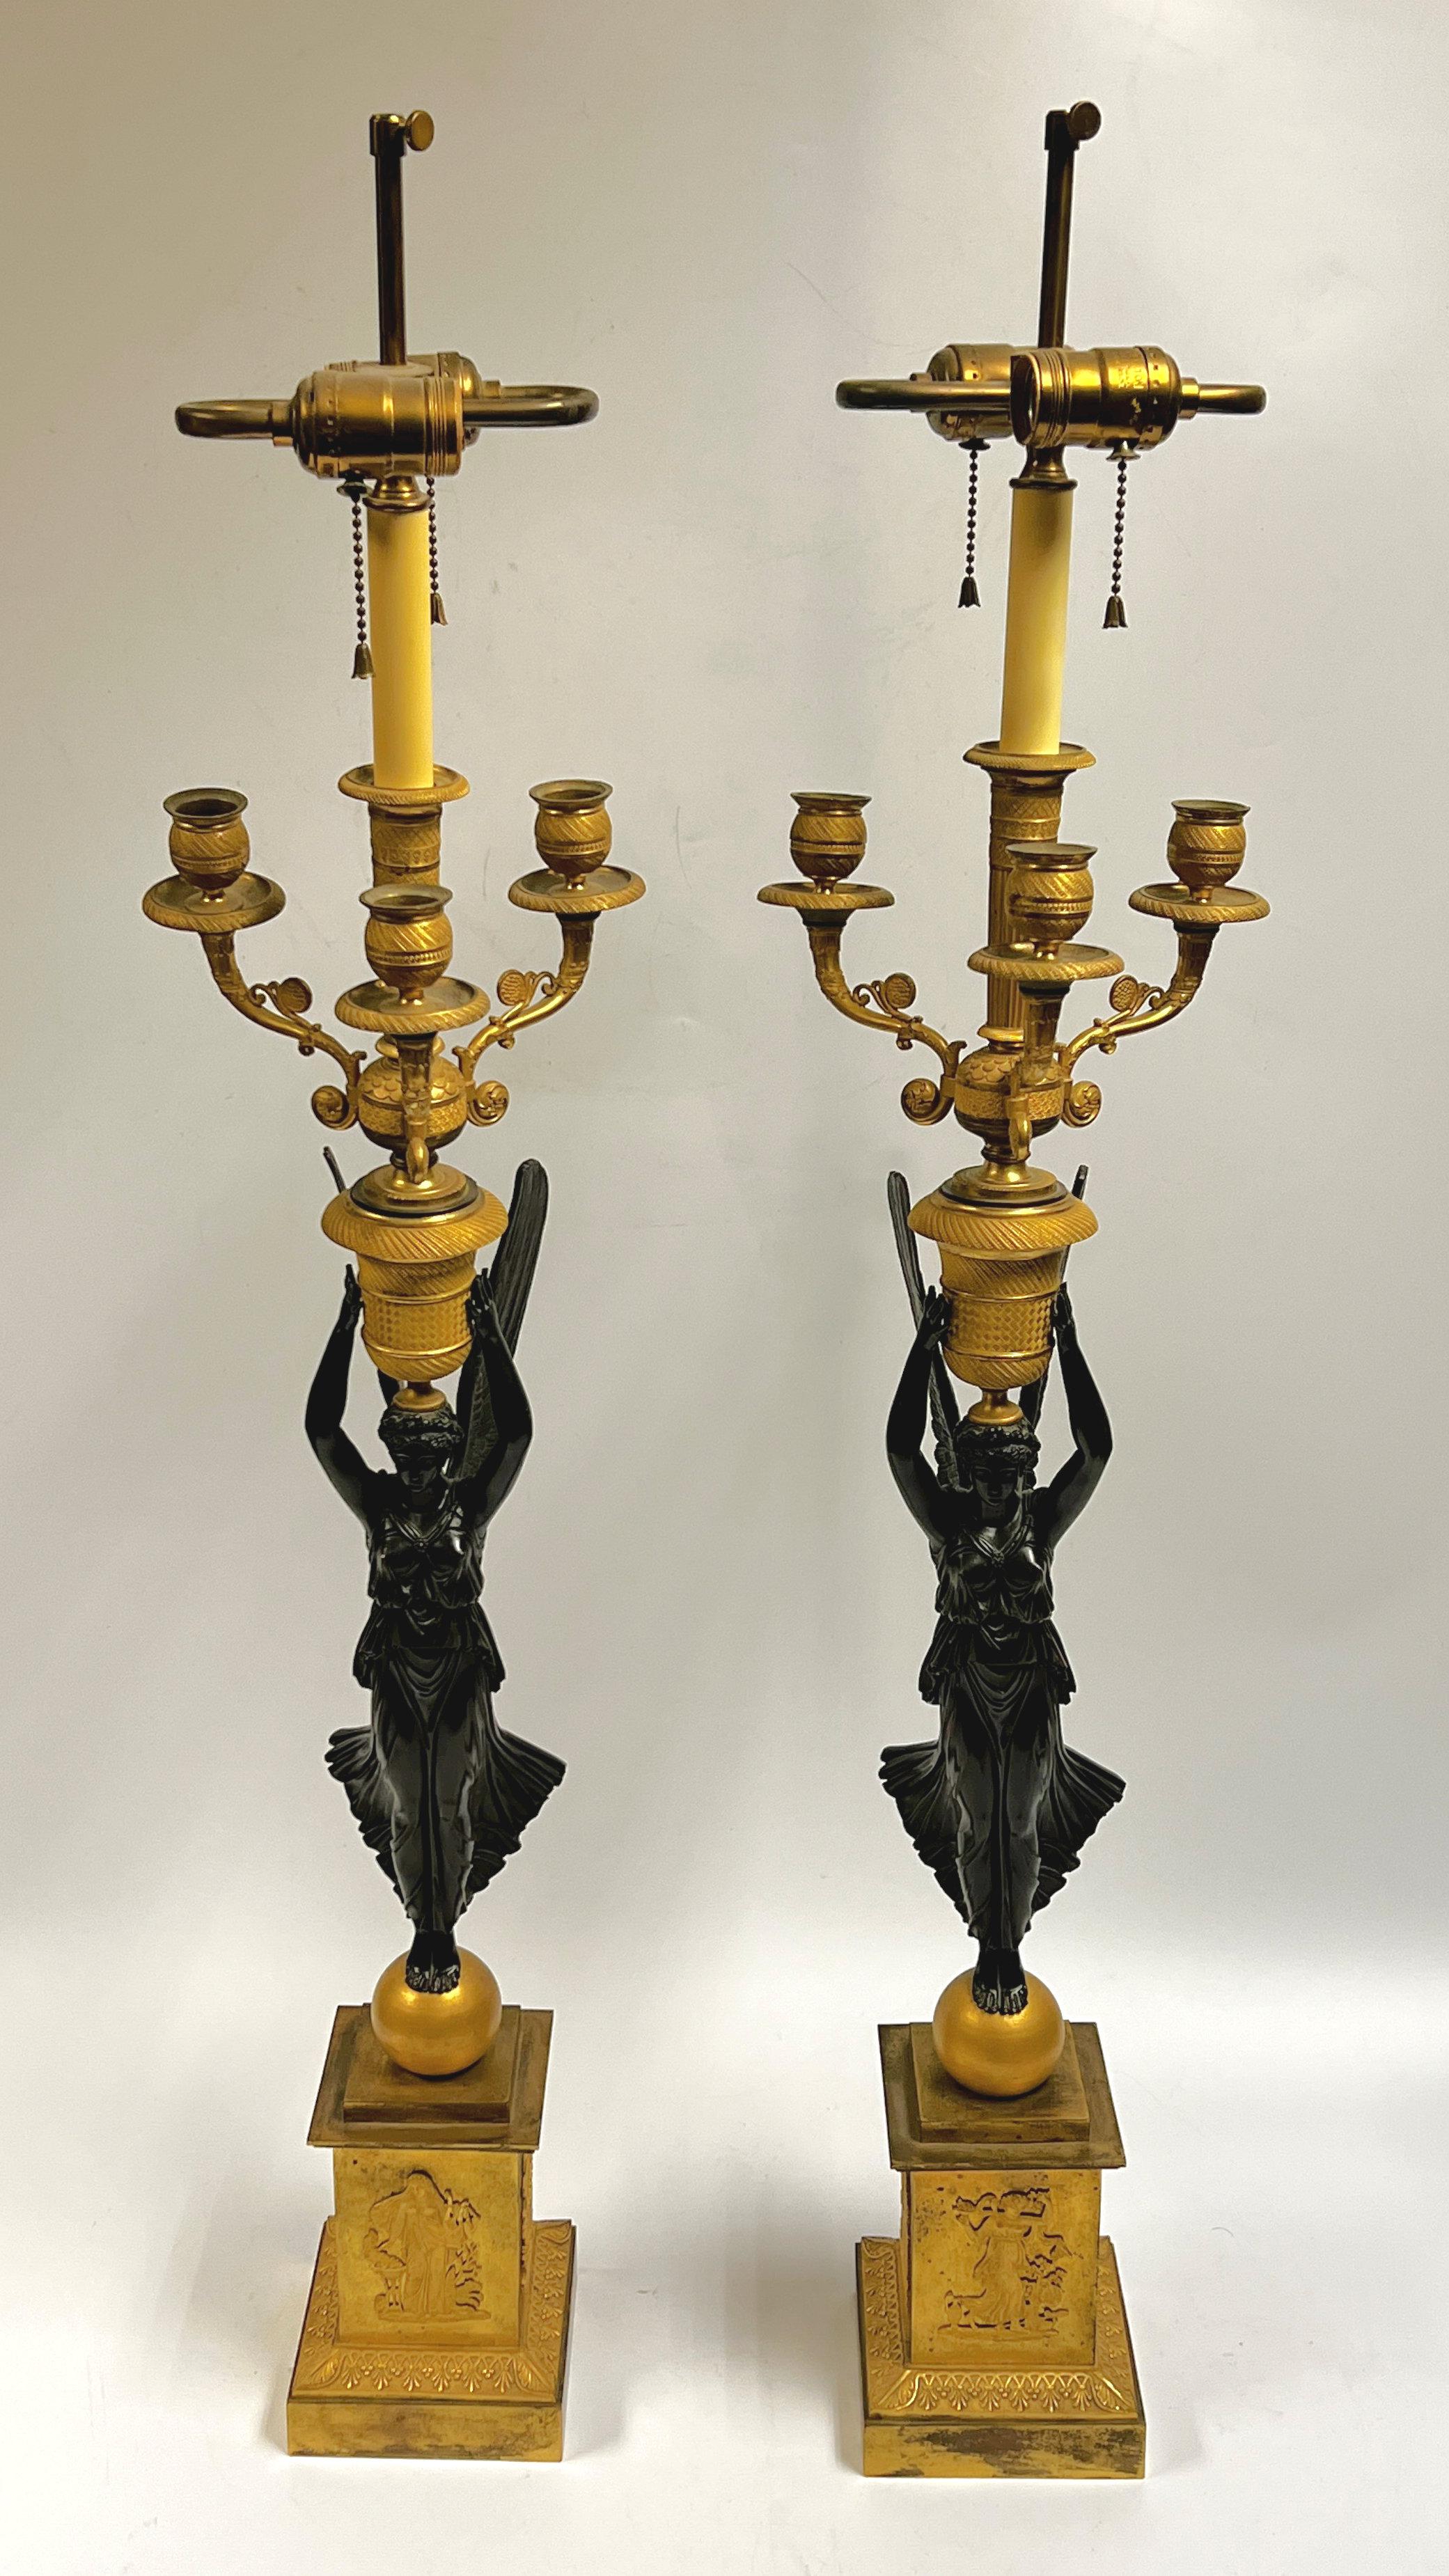 Pair of early 19 century French Empire Gilt and Patinated Bronze figural candelabras made to Table Lamps.